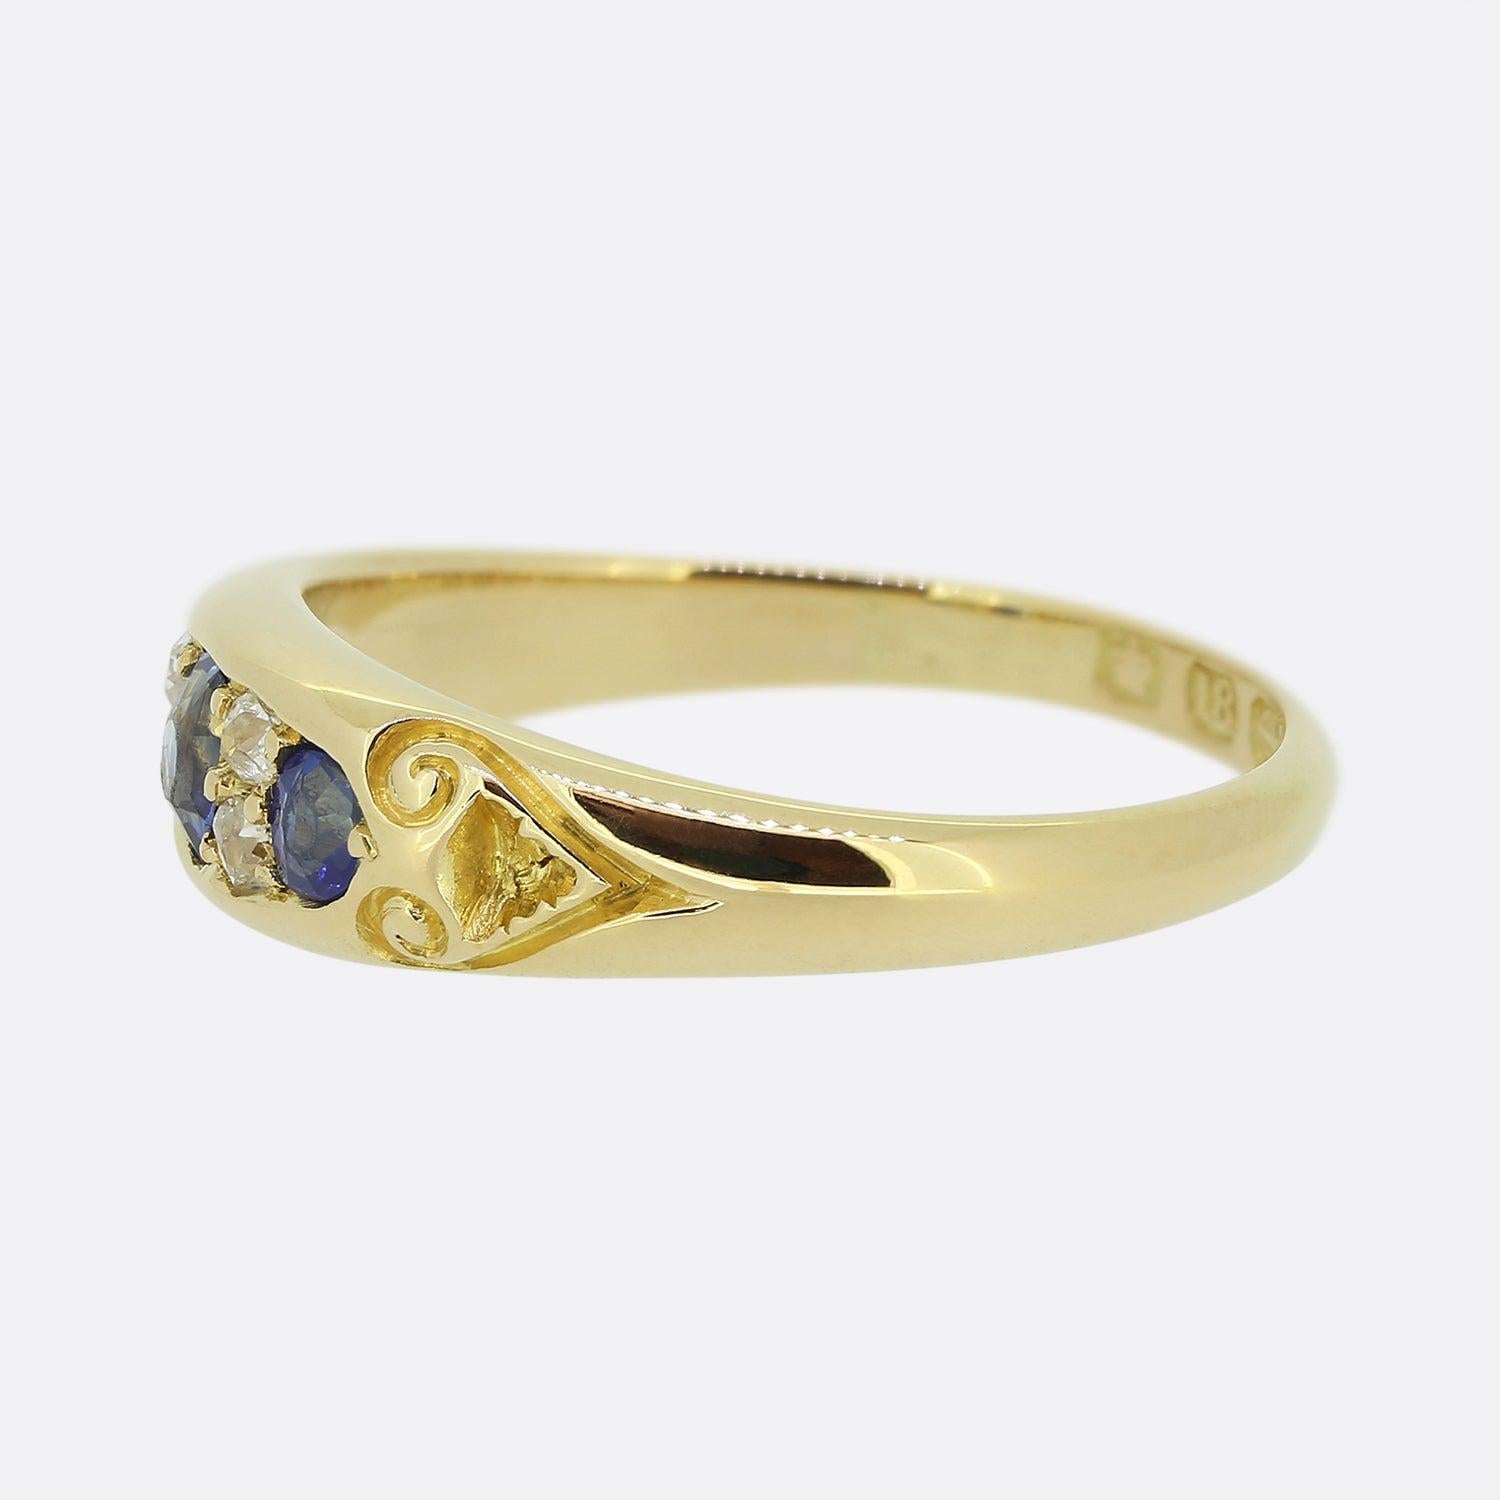 This is an antique sapphire and diamond ring from the Victorian era. An 18ct yellow gold mount plays host to three oval shaped sapphires possessing a wonderfully rich blue hue. These focal stones are individually separated by a duo of round faceted